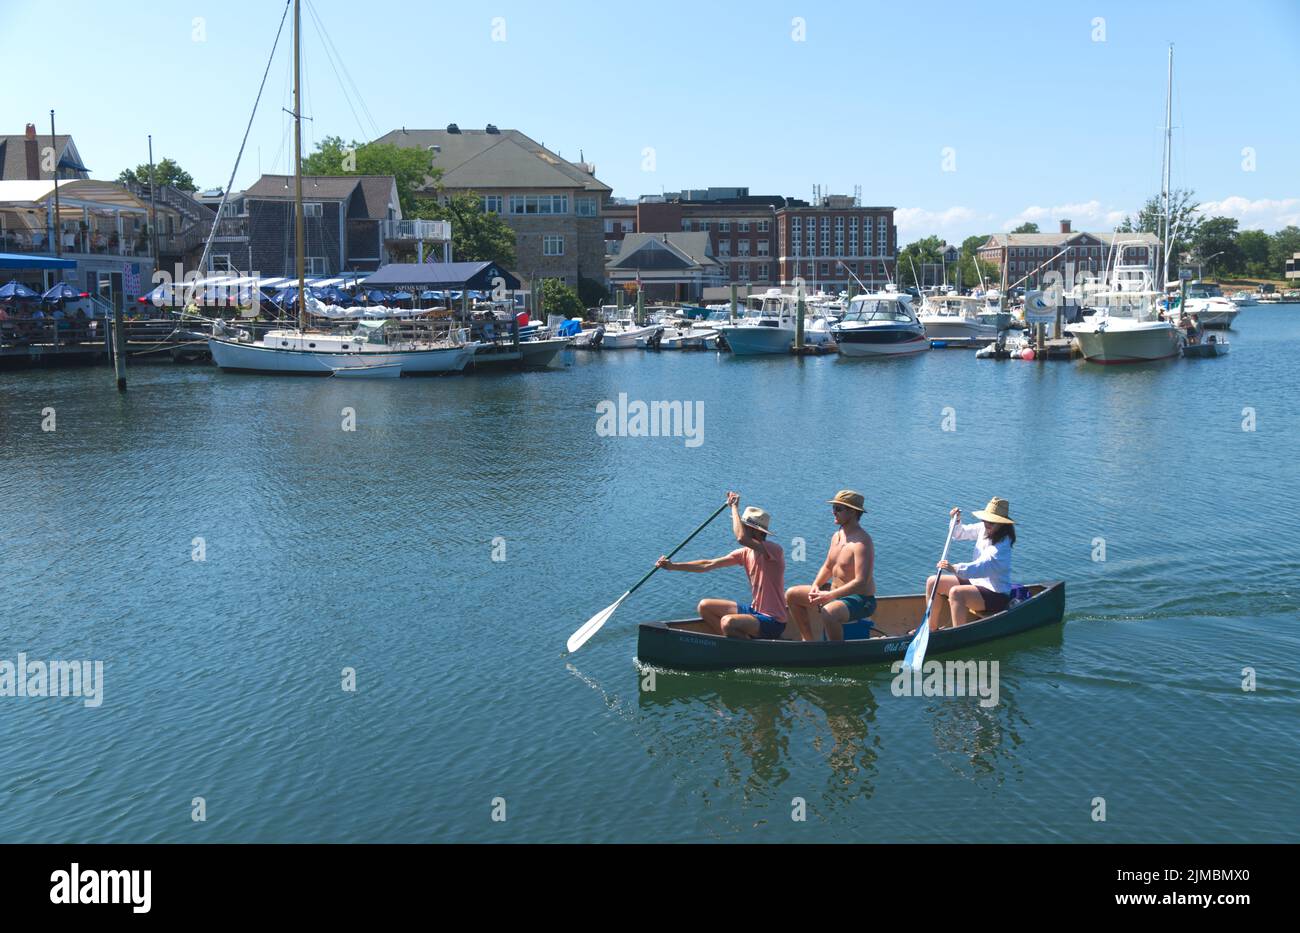 Canoeing across Eel Pond inlet in Woods Hole, Massachusetts on Cape Cod, USA Stock Photo